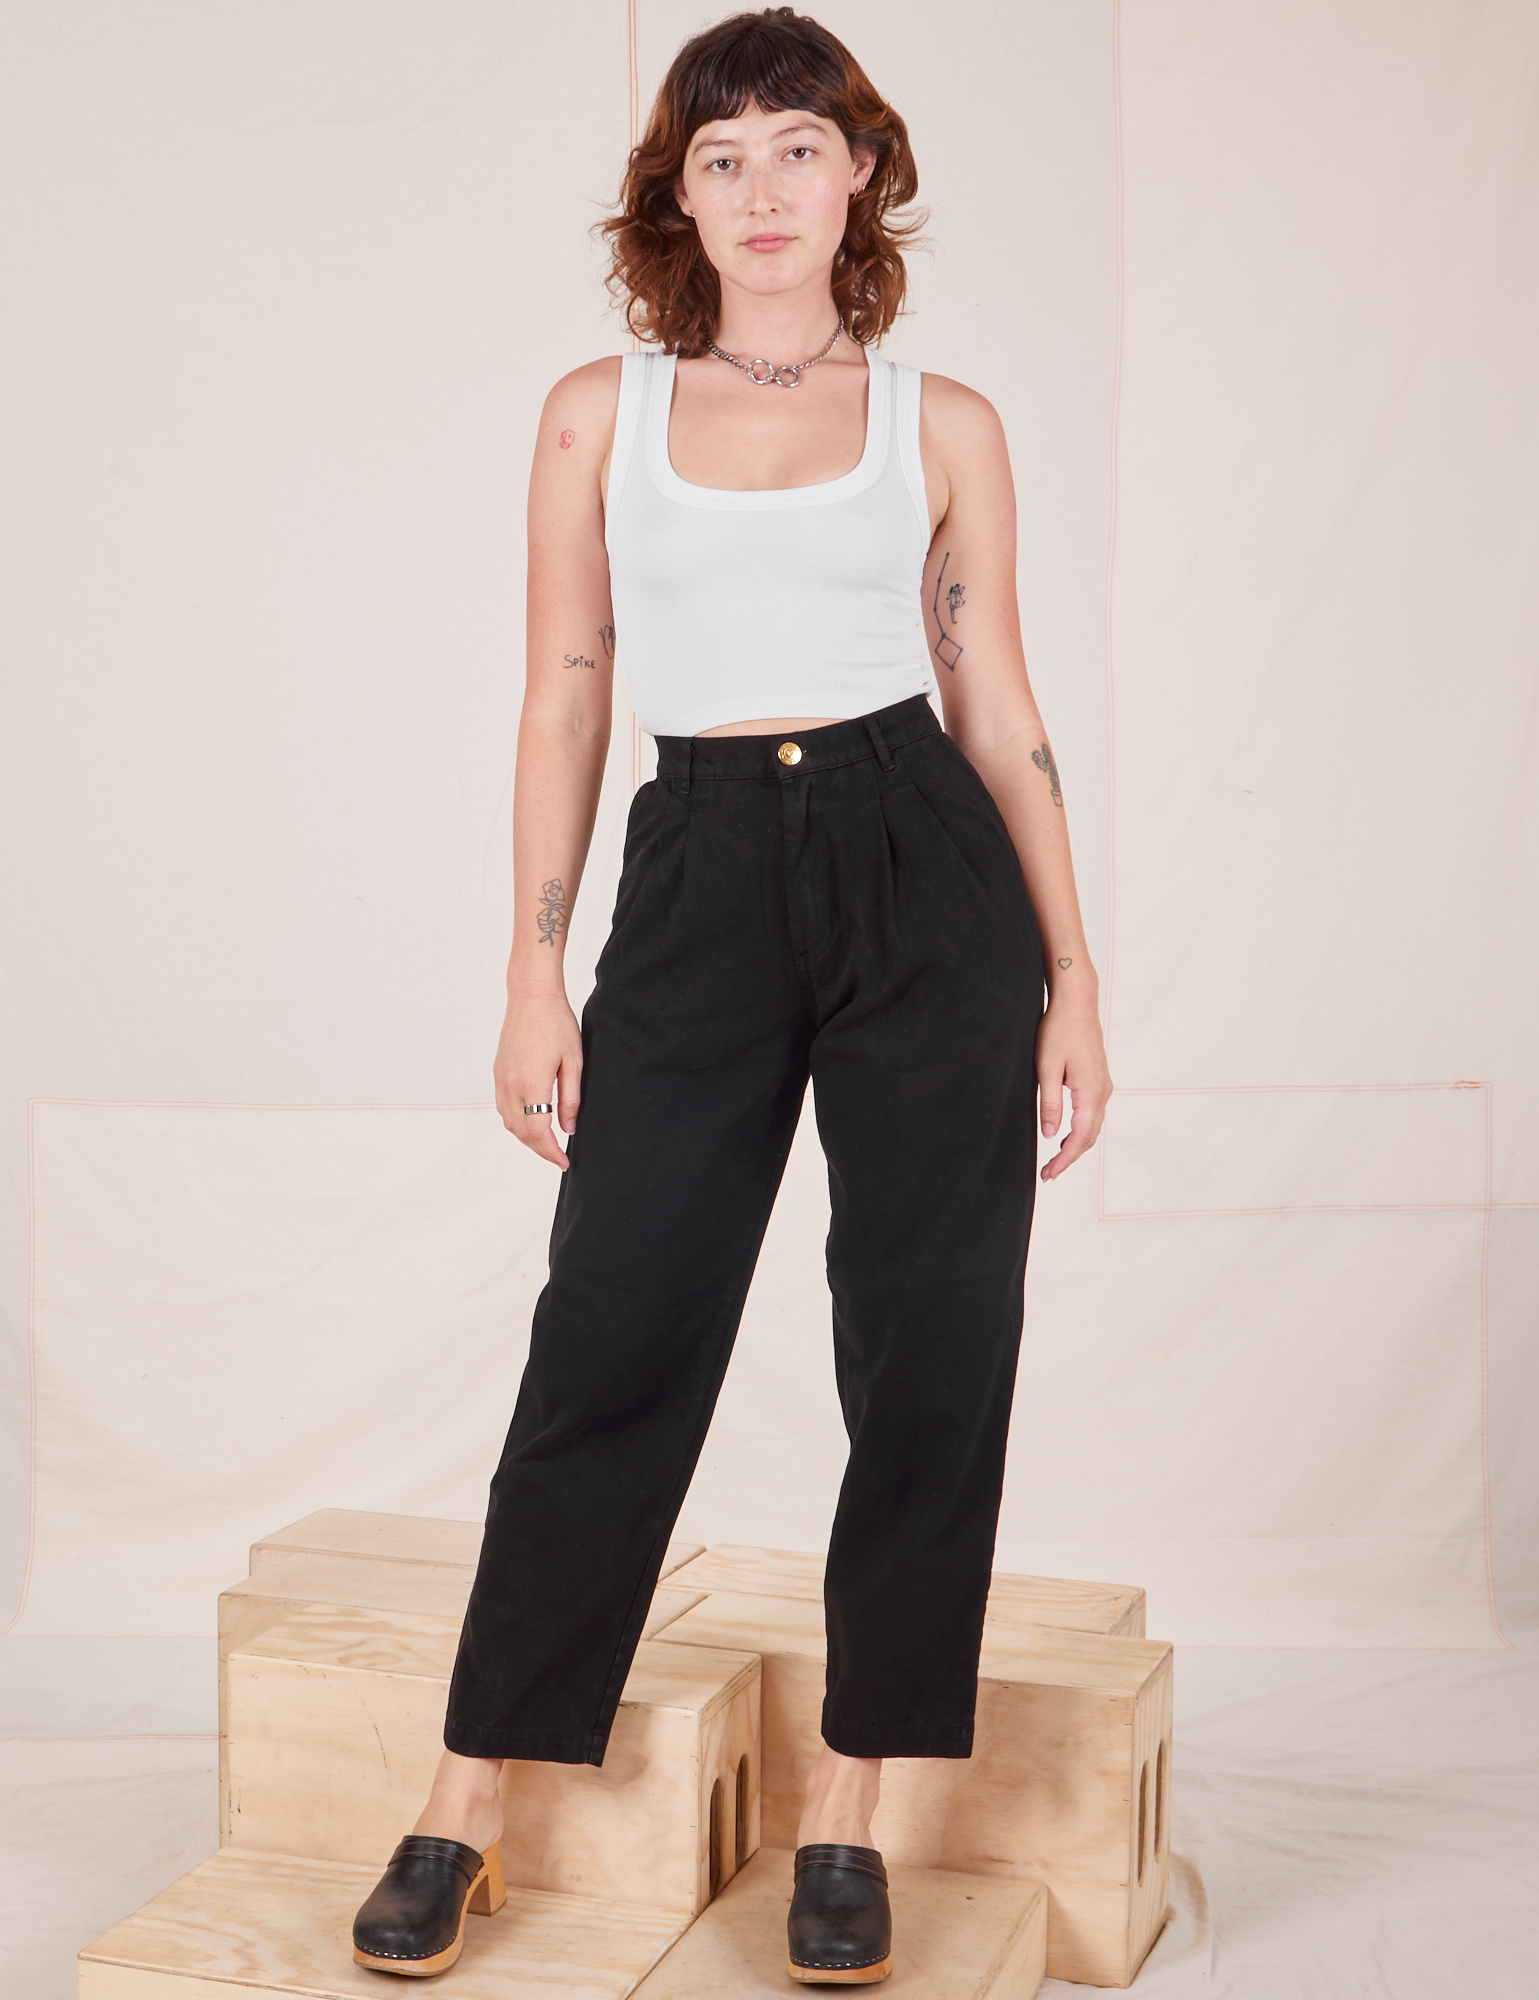 Alex is 5&#39;8&quot; and wearing XXS Heavyweight Trousers in Basic Black paired with vintage off-white Cropped Tank Top.